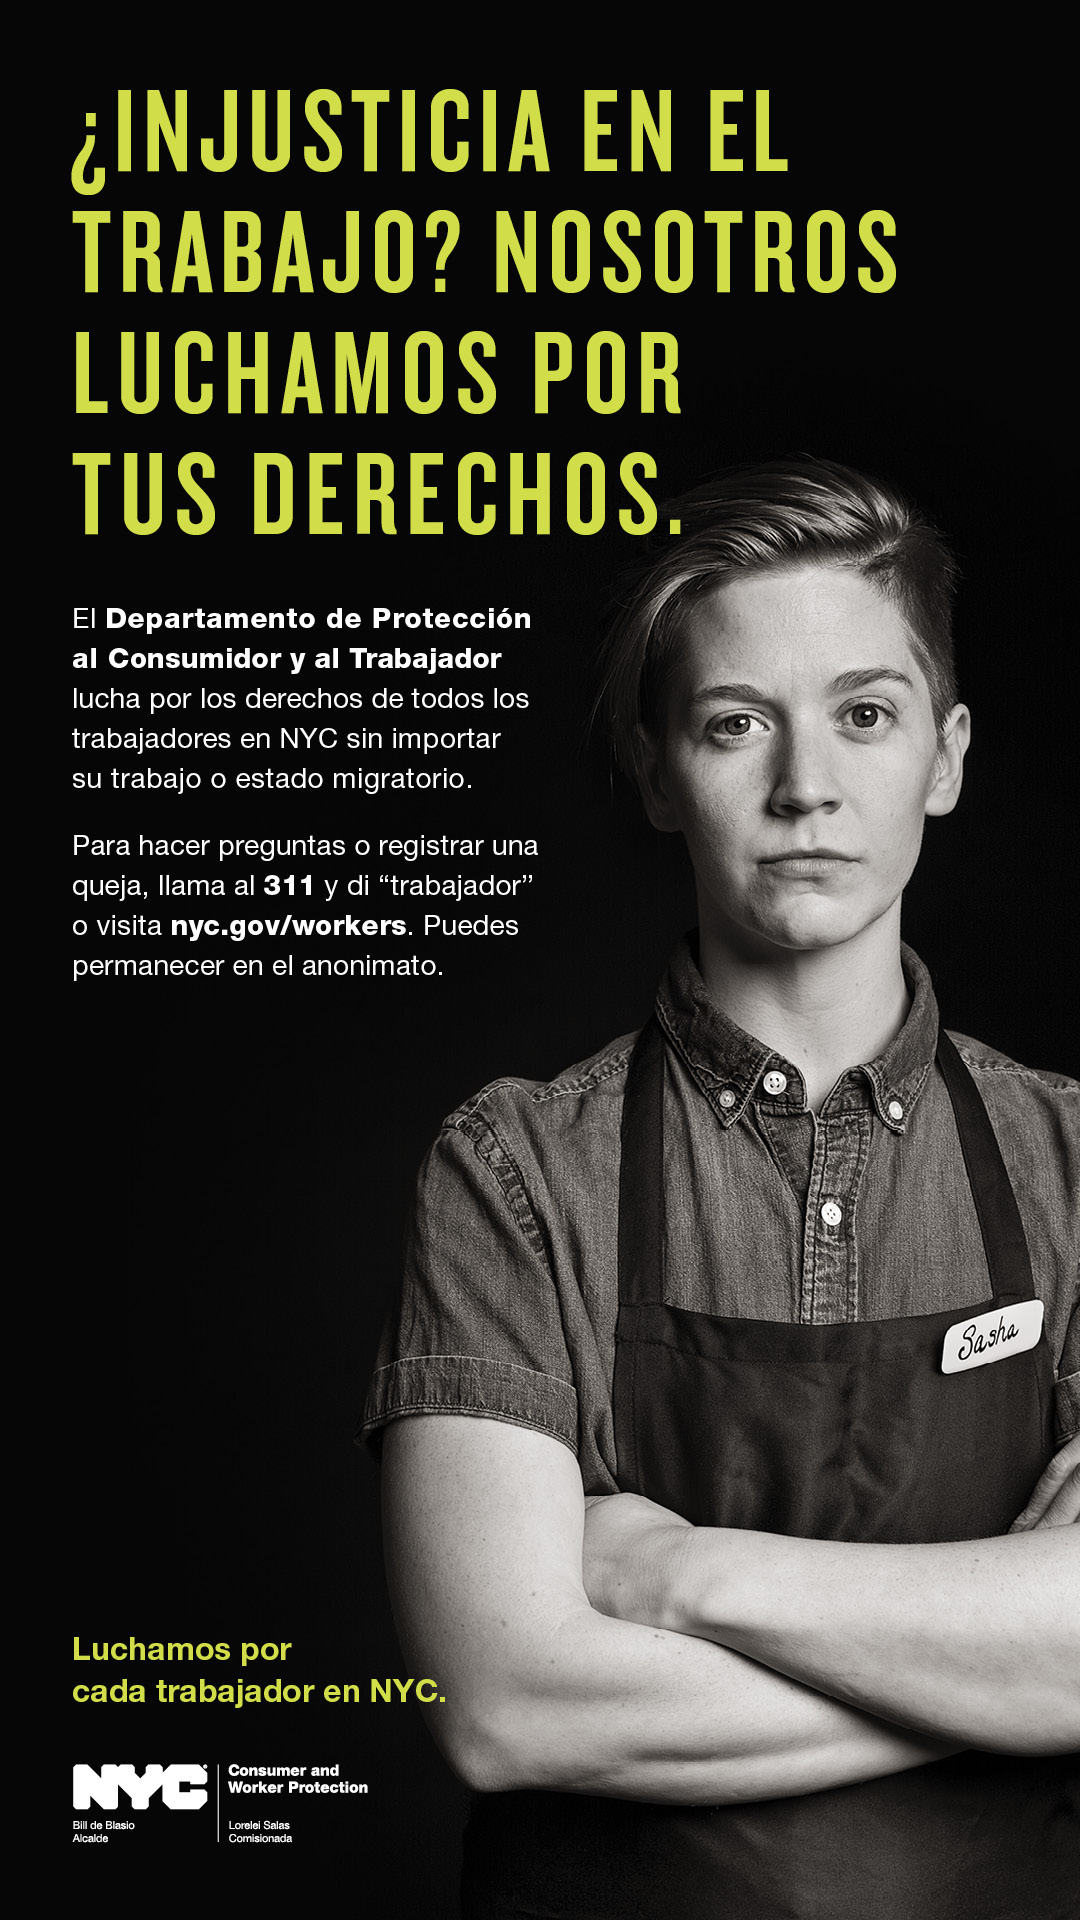 Spanish version of workers' rights campaign ad featuring a food or retail industry worker